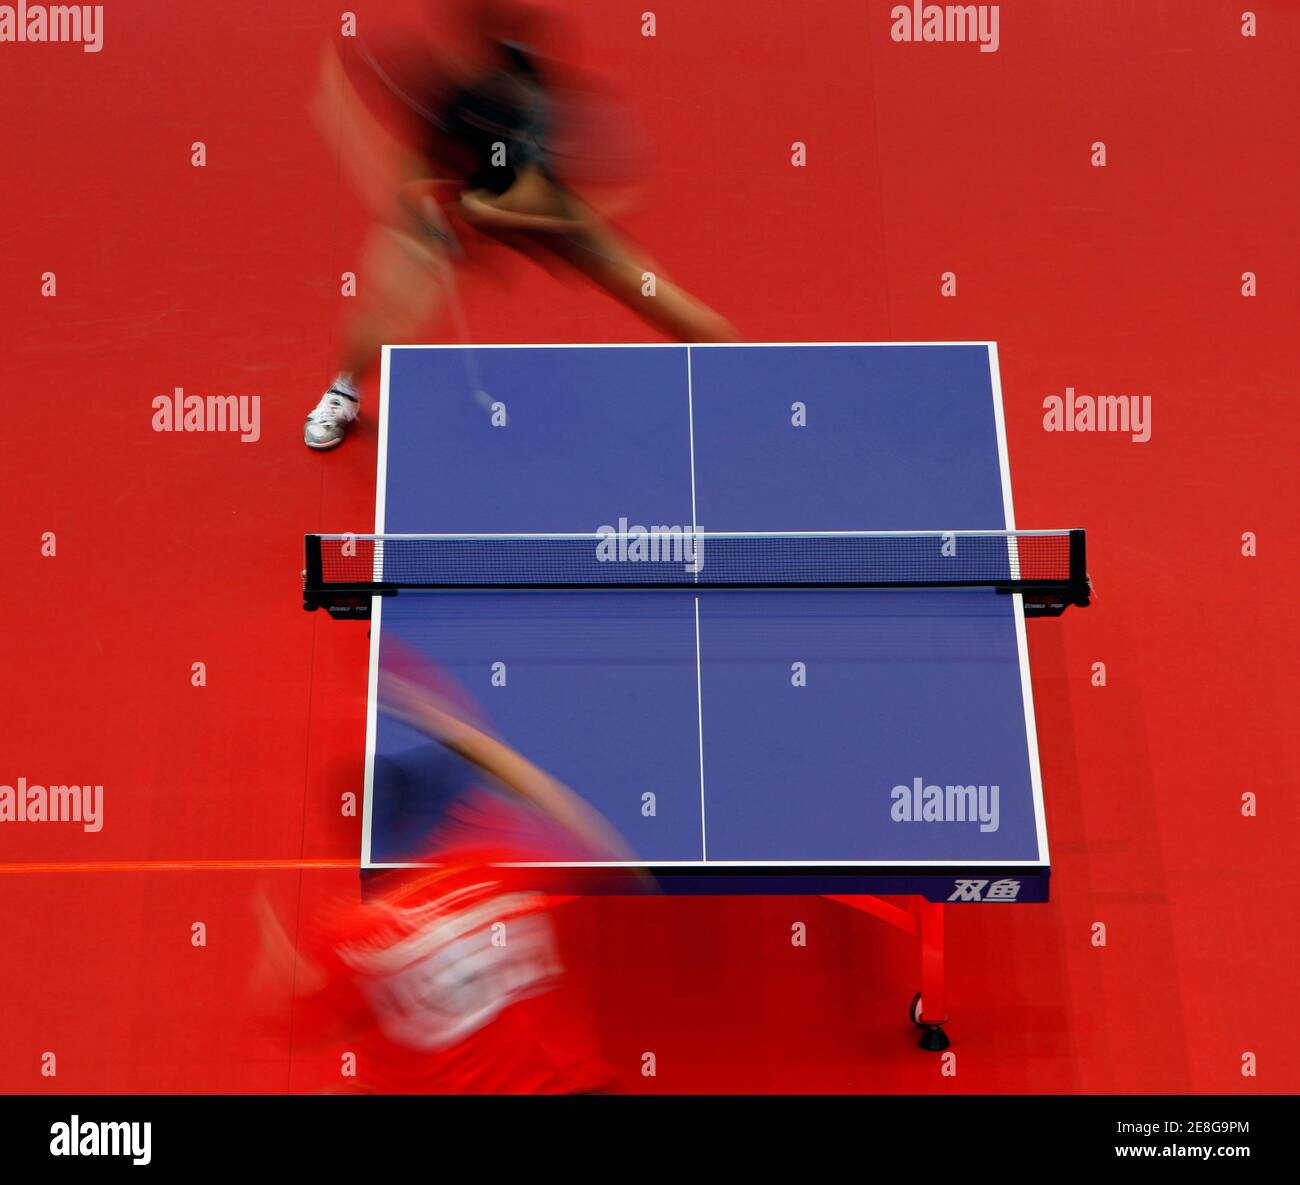 China's Wang Hao returns a shot to Japan's Jun Mizutani (top) during the East Asian Games men's team table tennis qualifiers in Hong Kong December 3, 2009.    REUTERS/Tyrone Siu    (CHINA SPORT TABLE TENNIS IMAGES OF THE DAY) Stock Photo